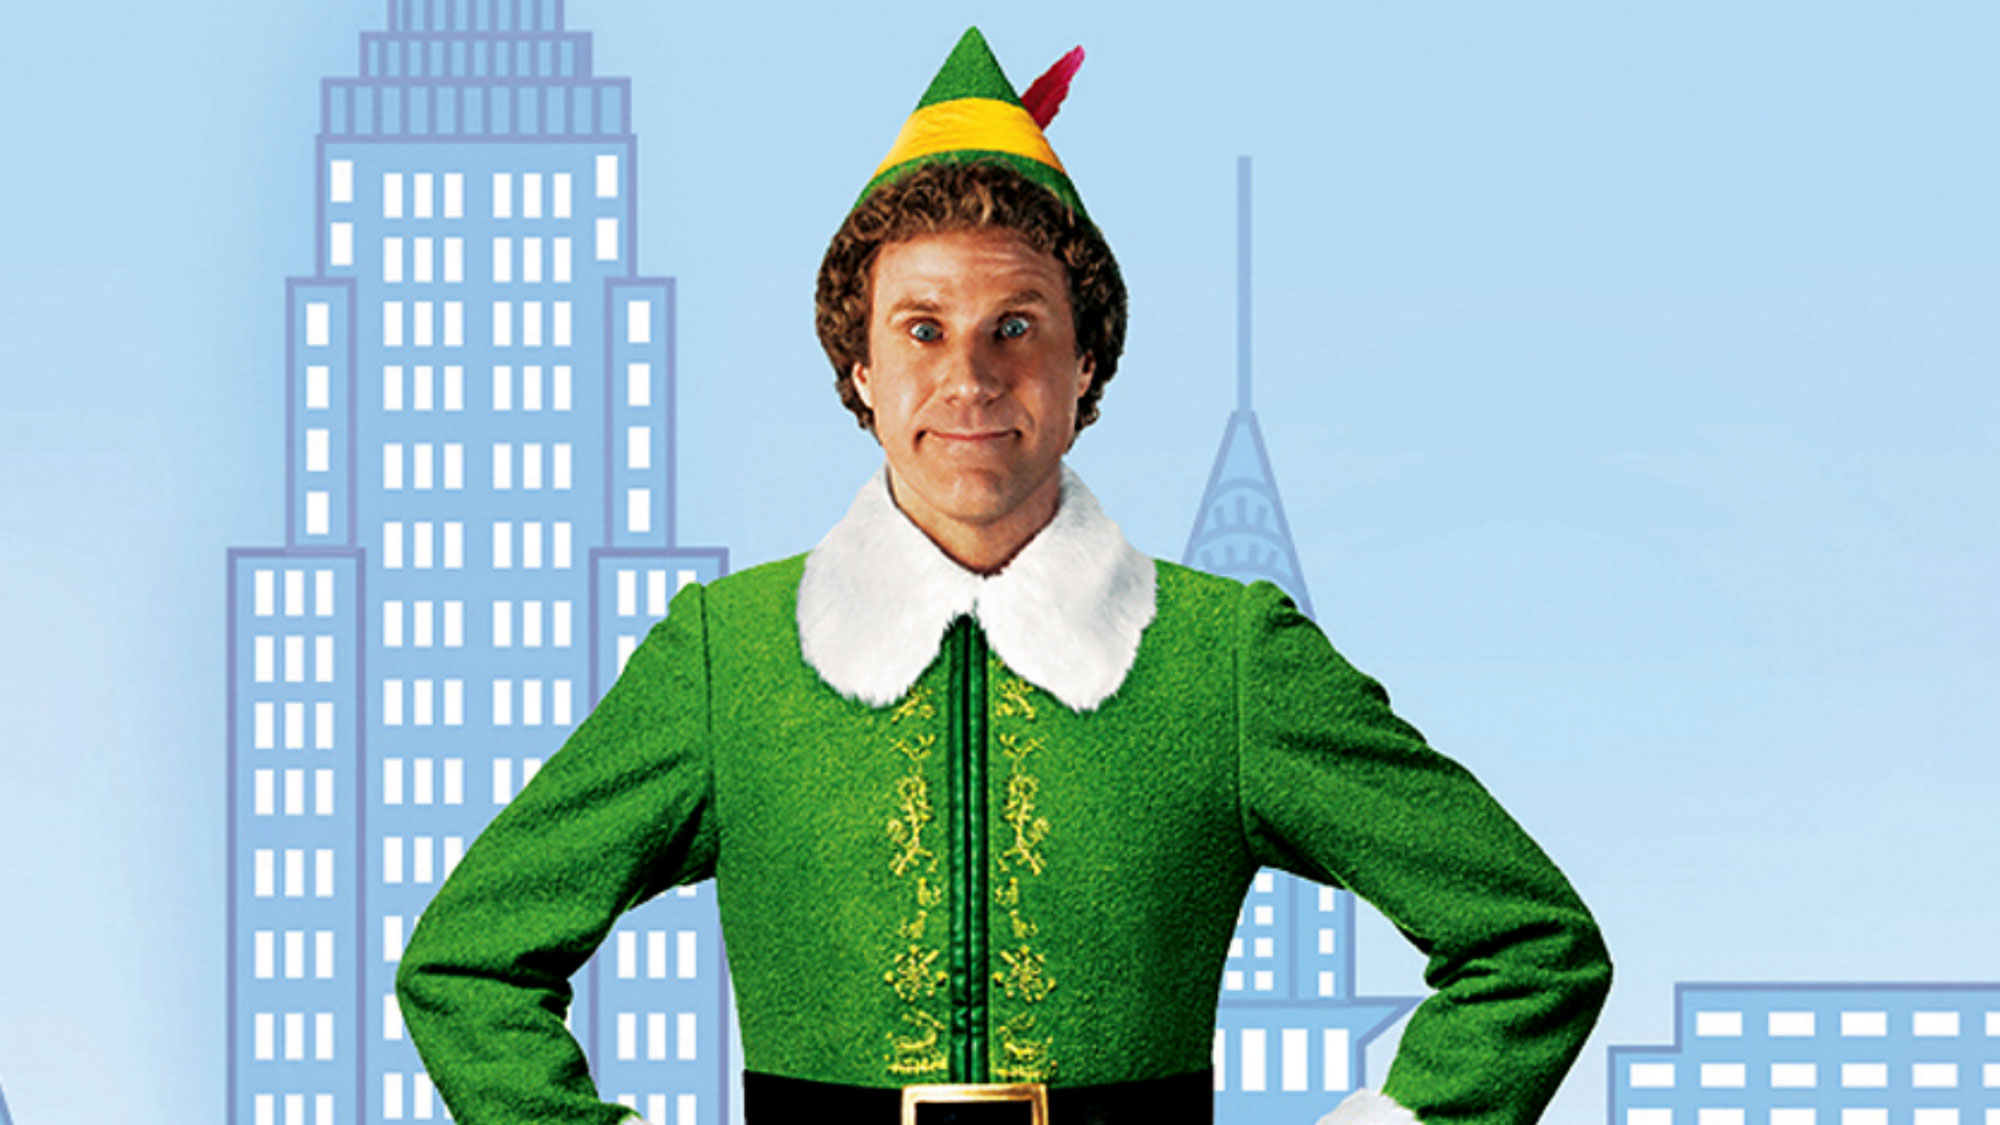 Where To Watch 'Elf': How To Stream The Movie This Holiday Season